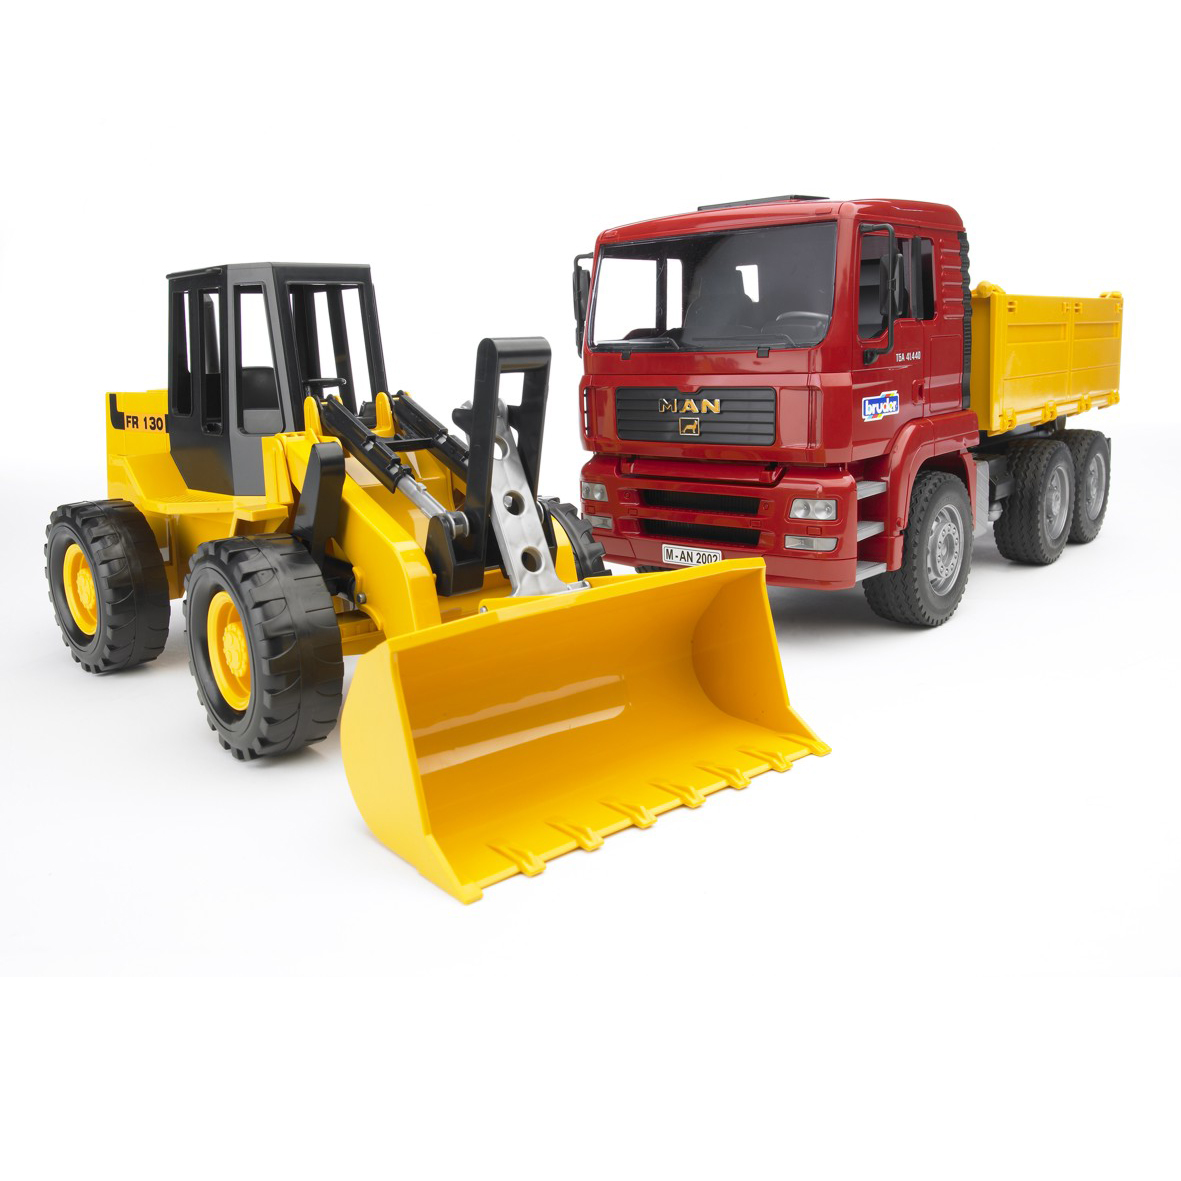 MAN TGA tipper truck with articulated wheel loader FR 130